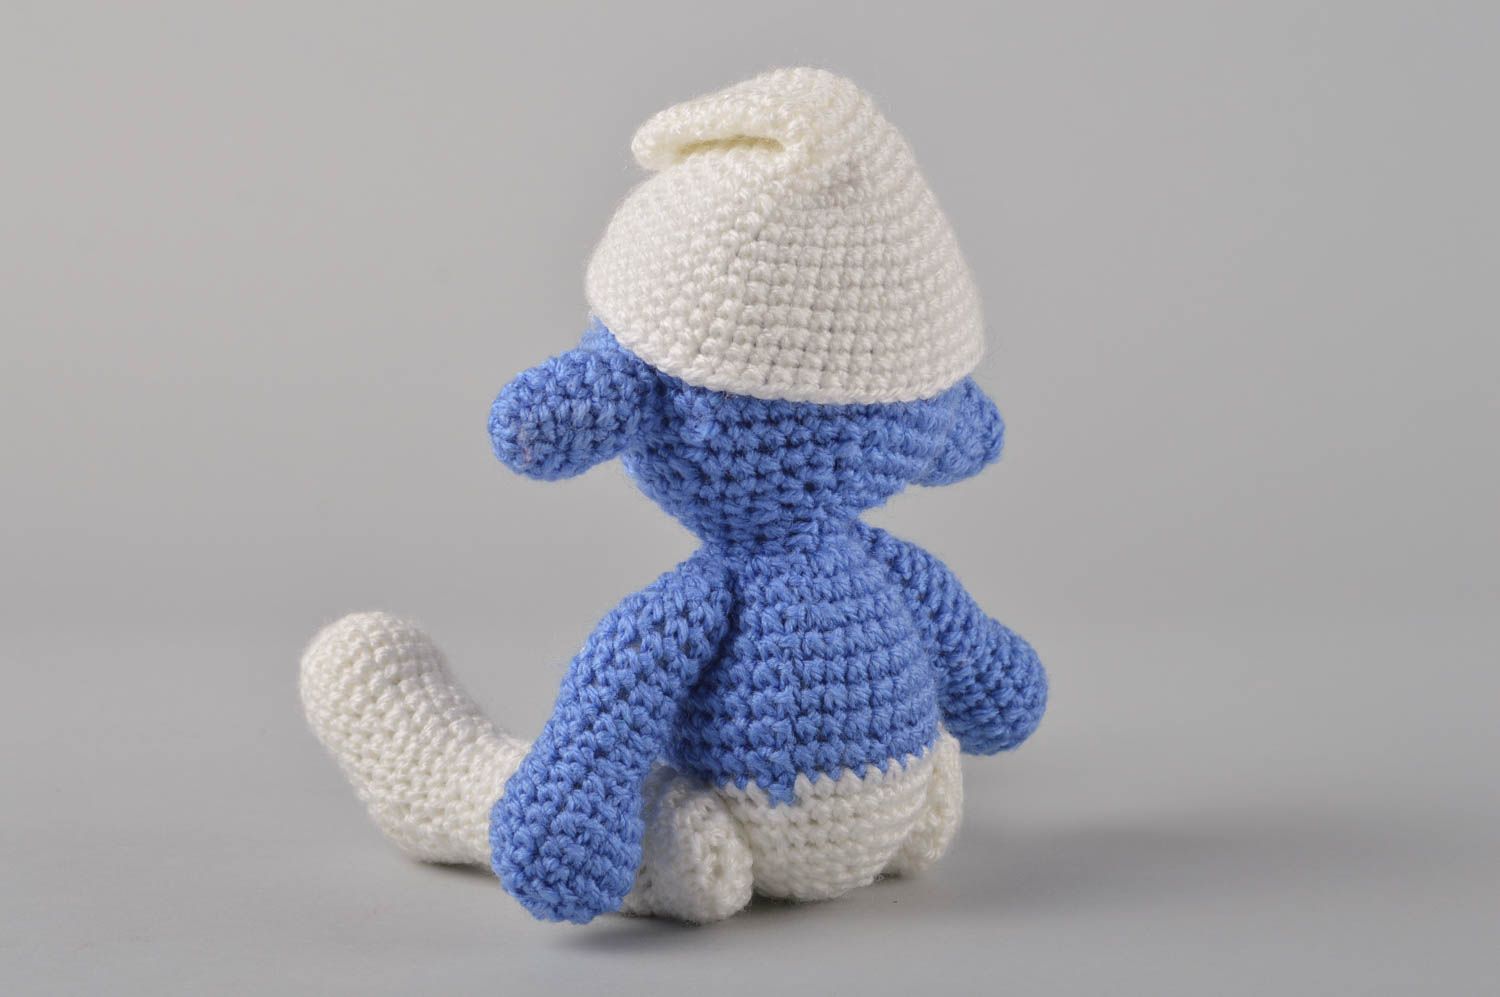 Handmade toy crocheted toy designer toy soft toy unusual gift for baby photo 5